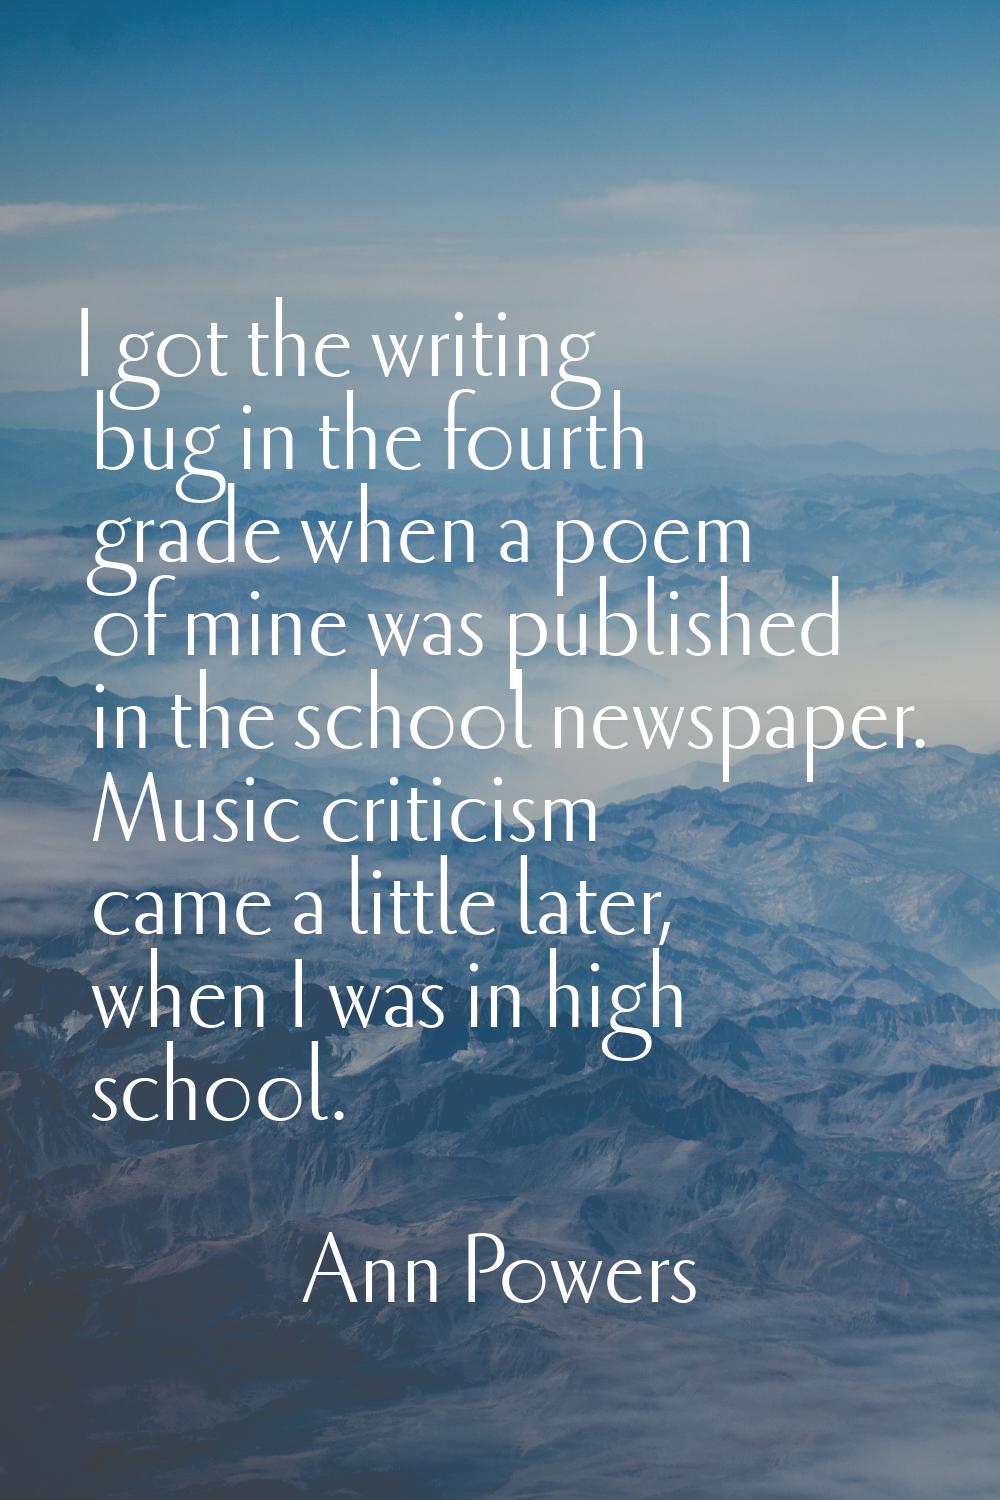 I got the writing bug in the fourth grade when a poem of mine was published in the school newspaper